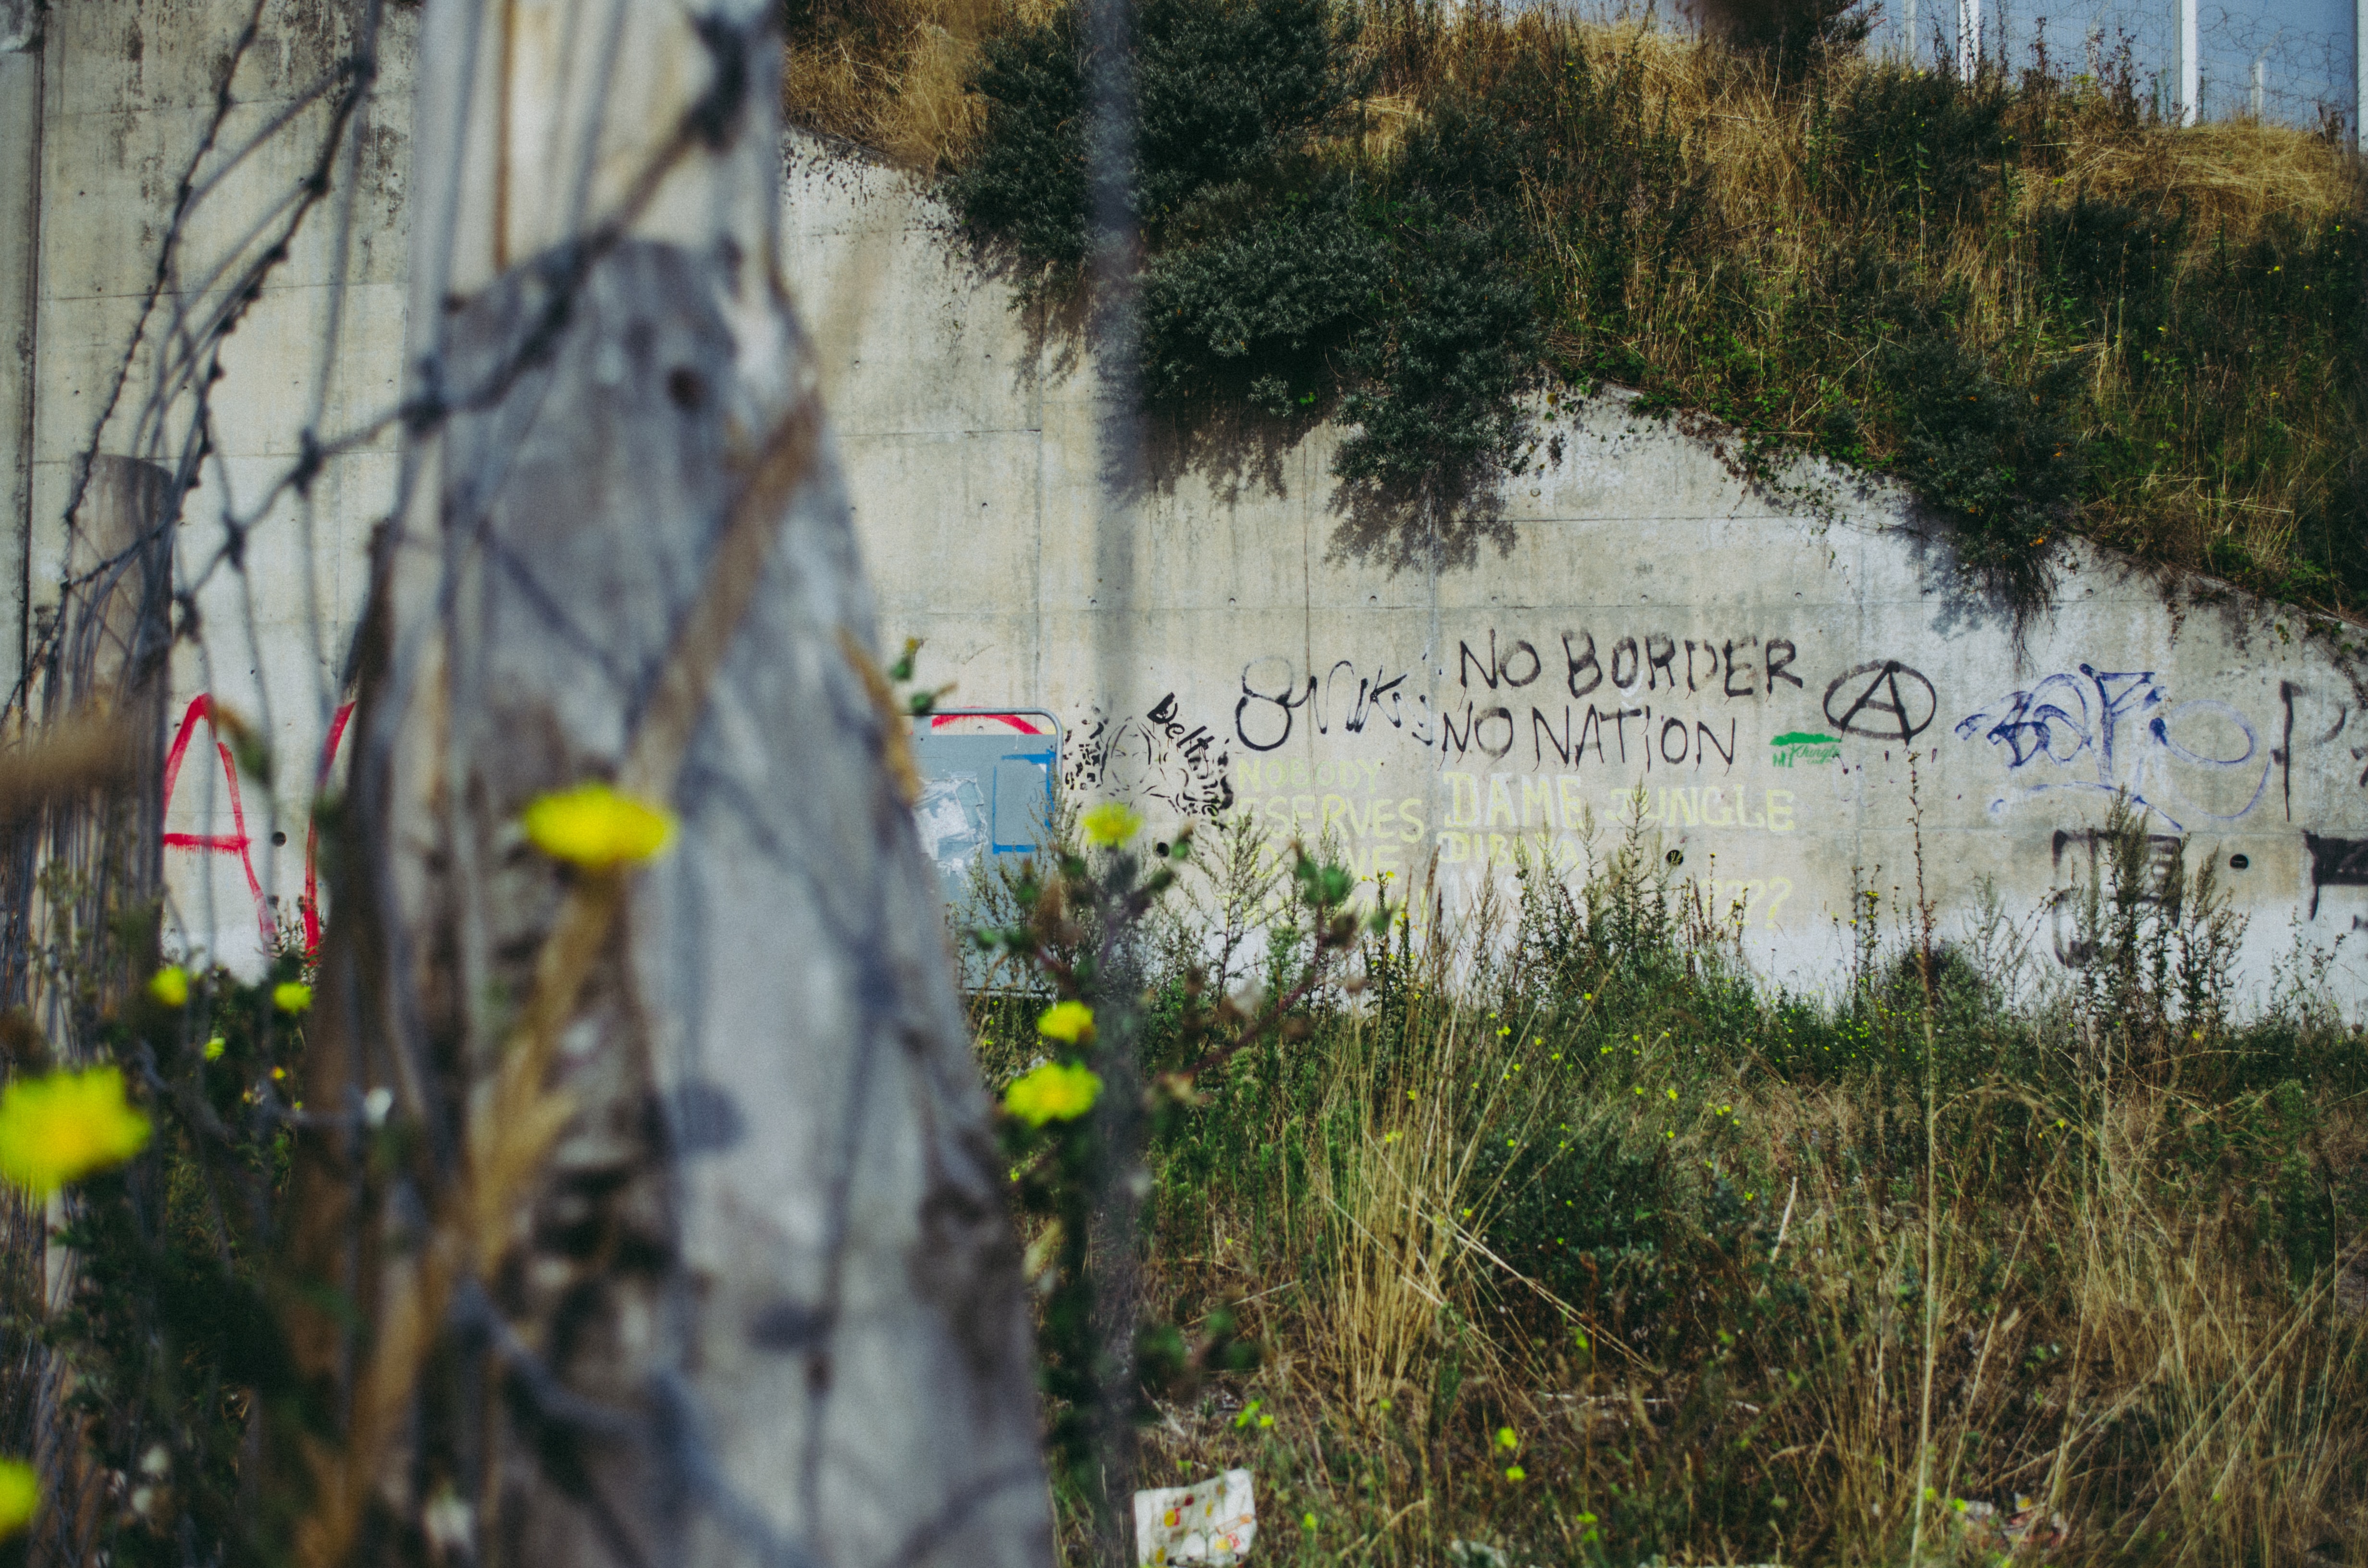 Graffiti on a dirty wall, near barbed wire and an abandoned tent